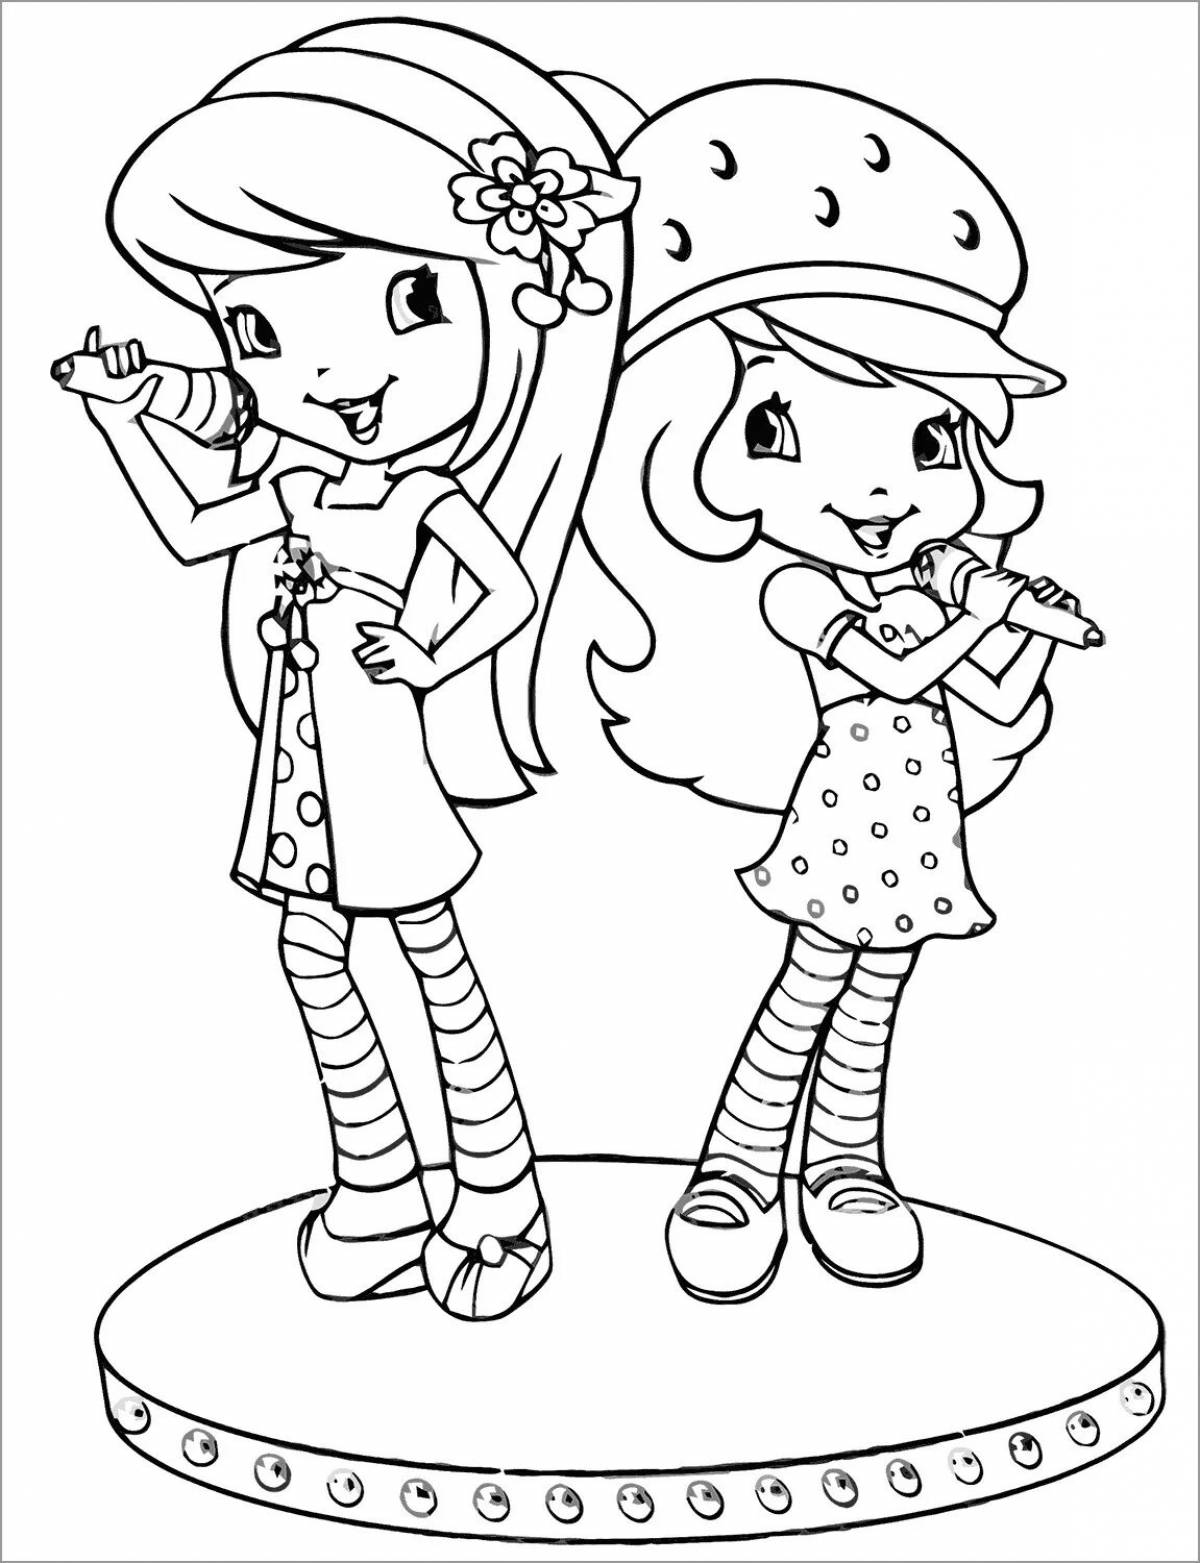 Colorful adventures of berry girls coloring book